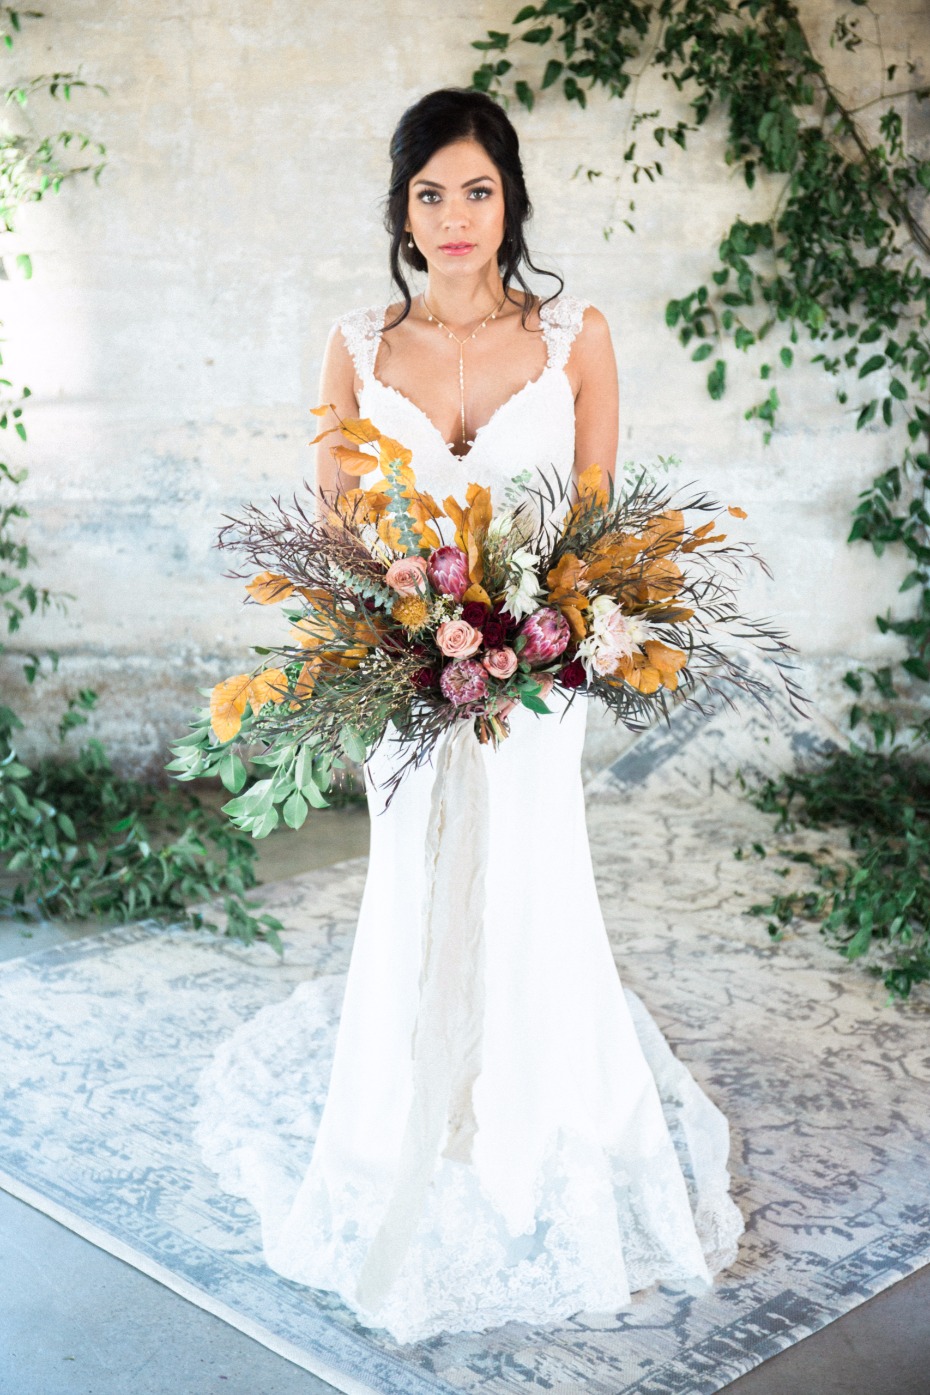 Gorgeous bridal look with a fall bouquet